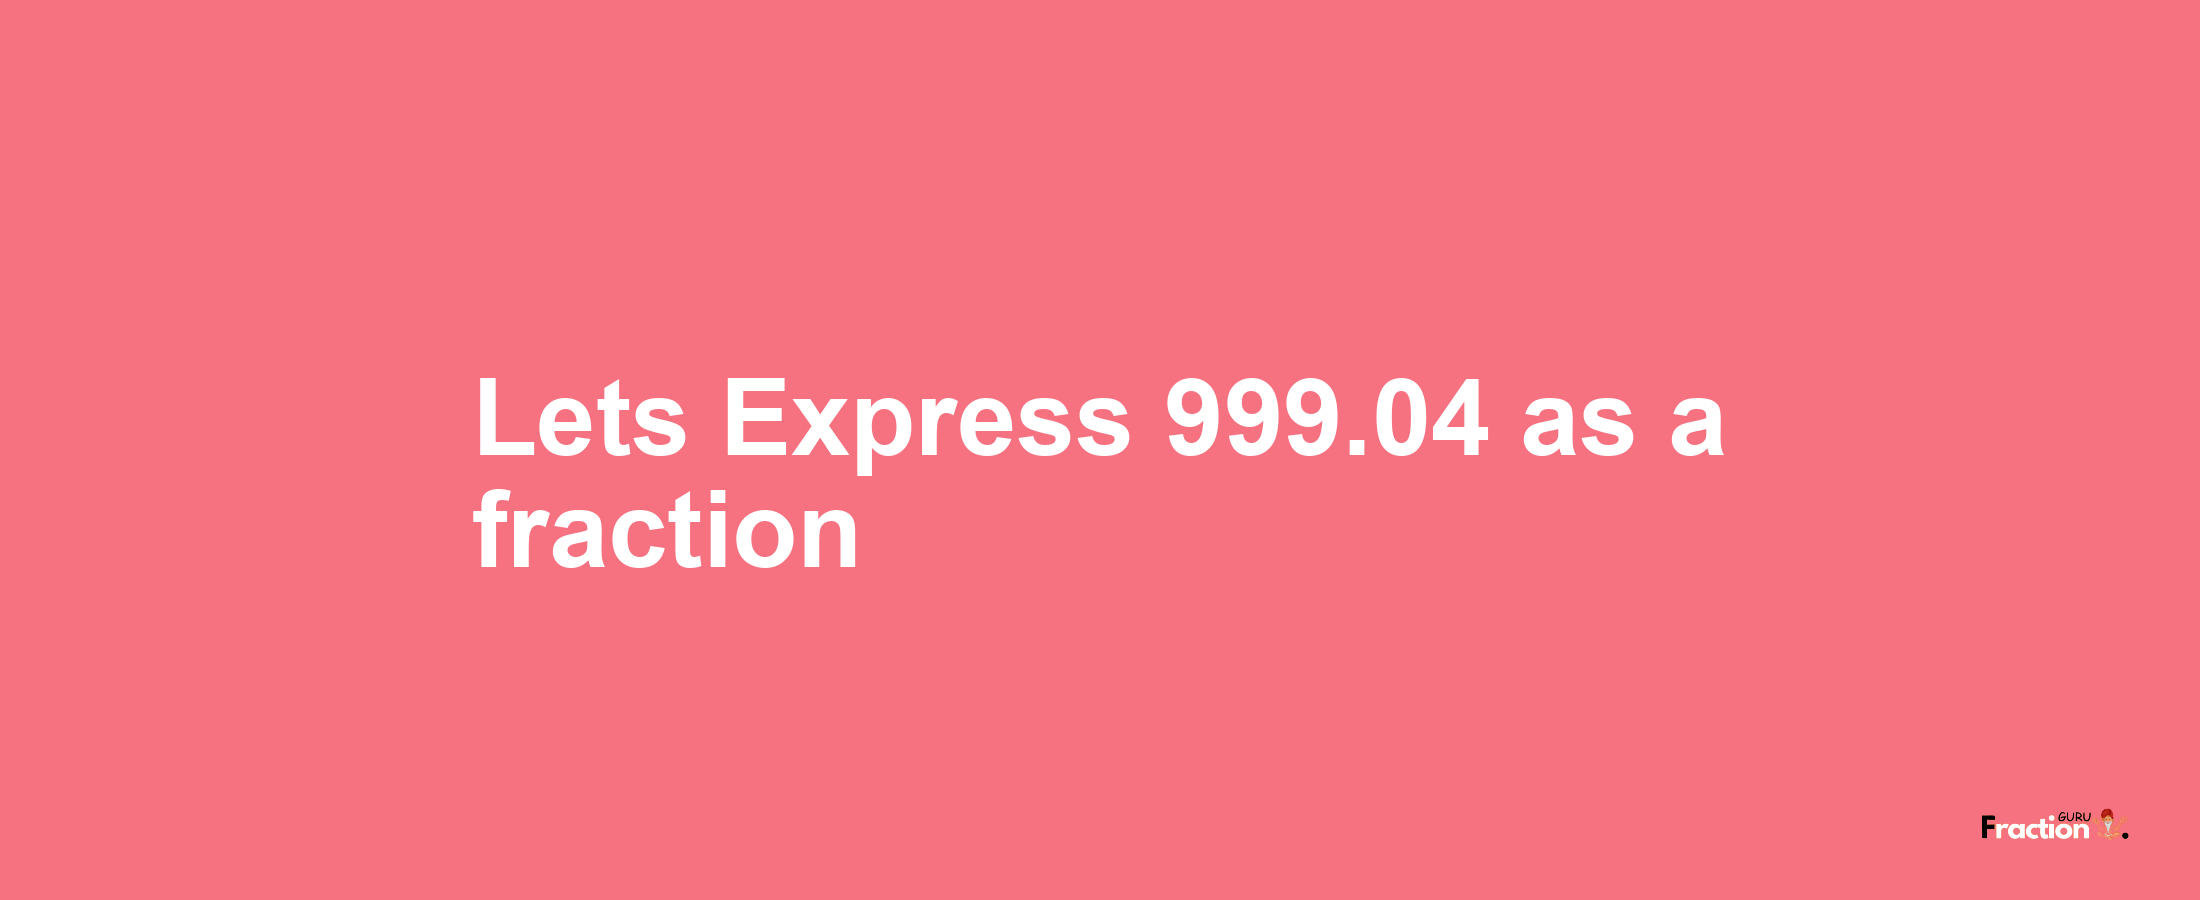 Lets Express 999.04 as afraction